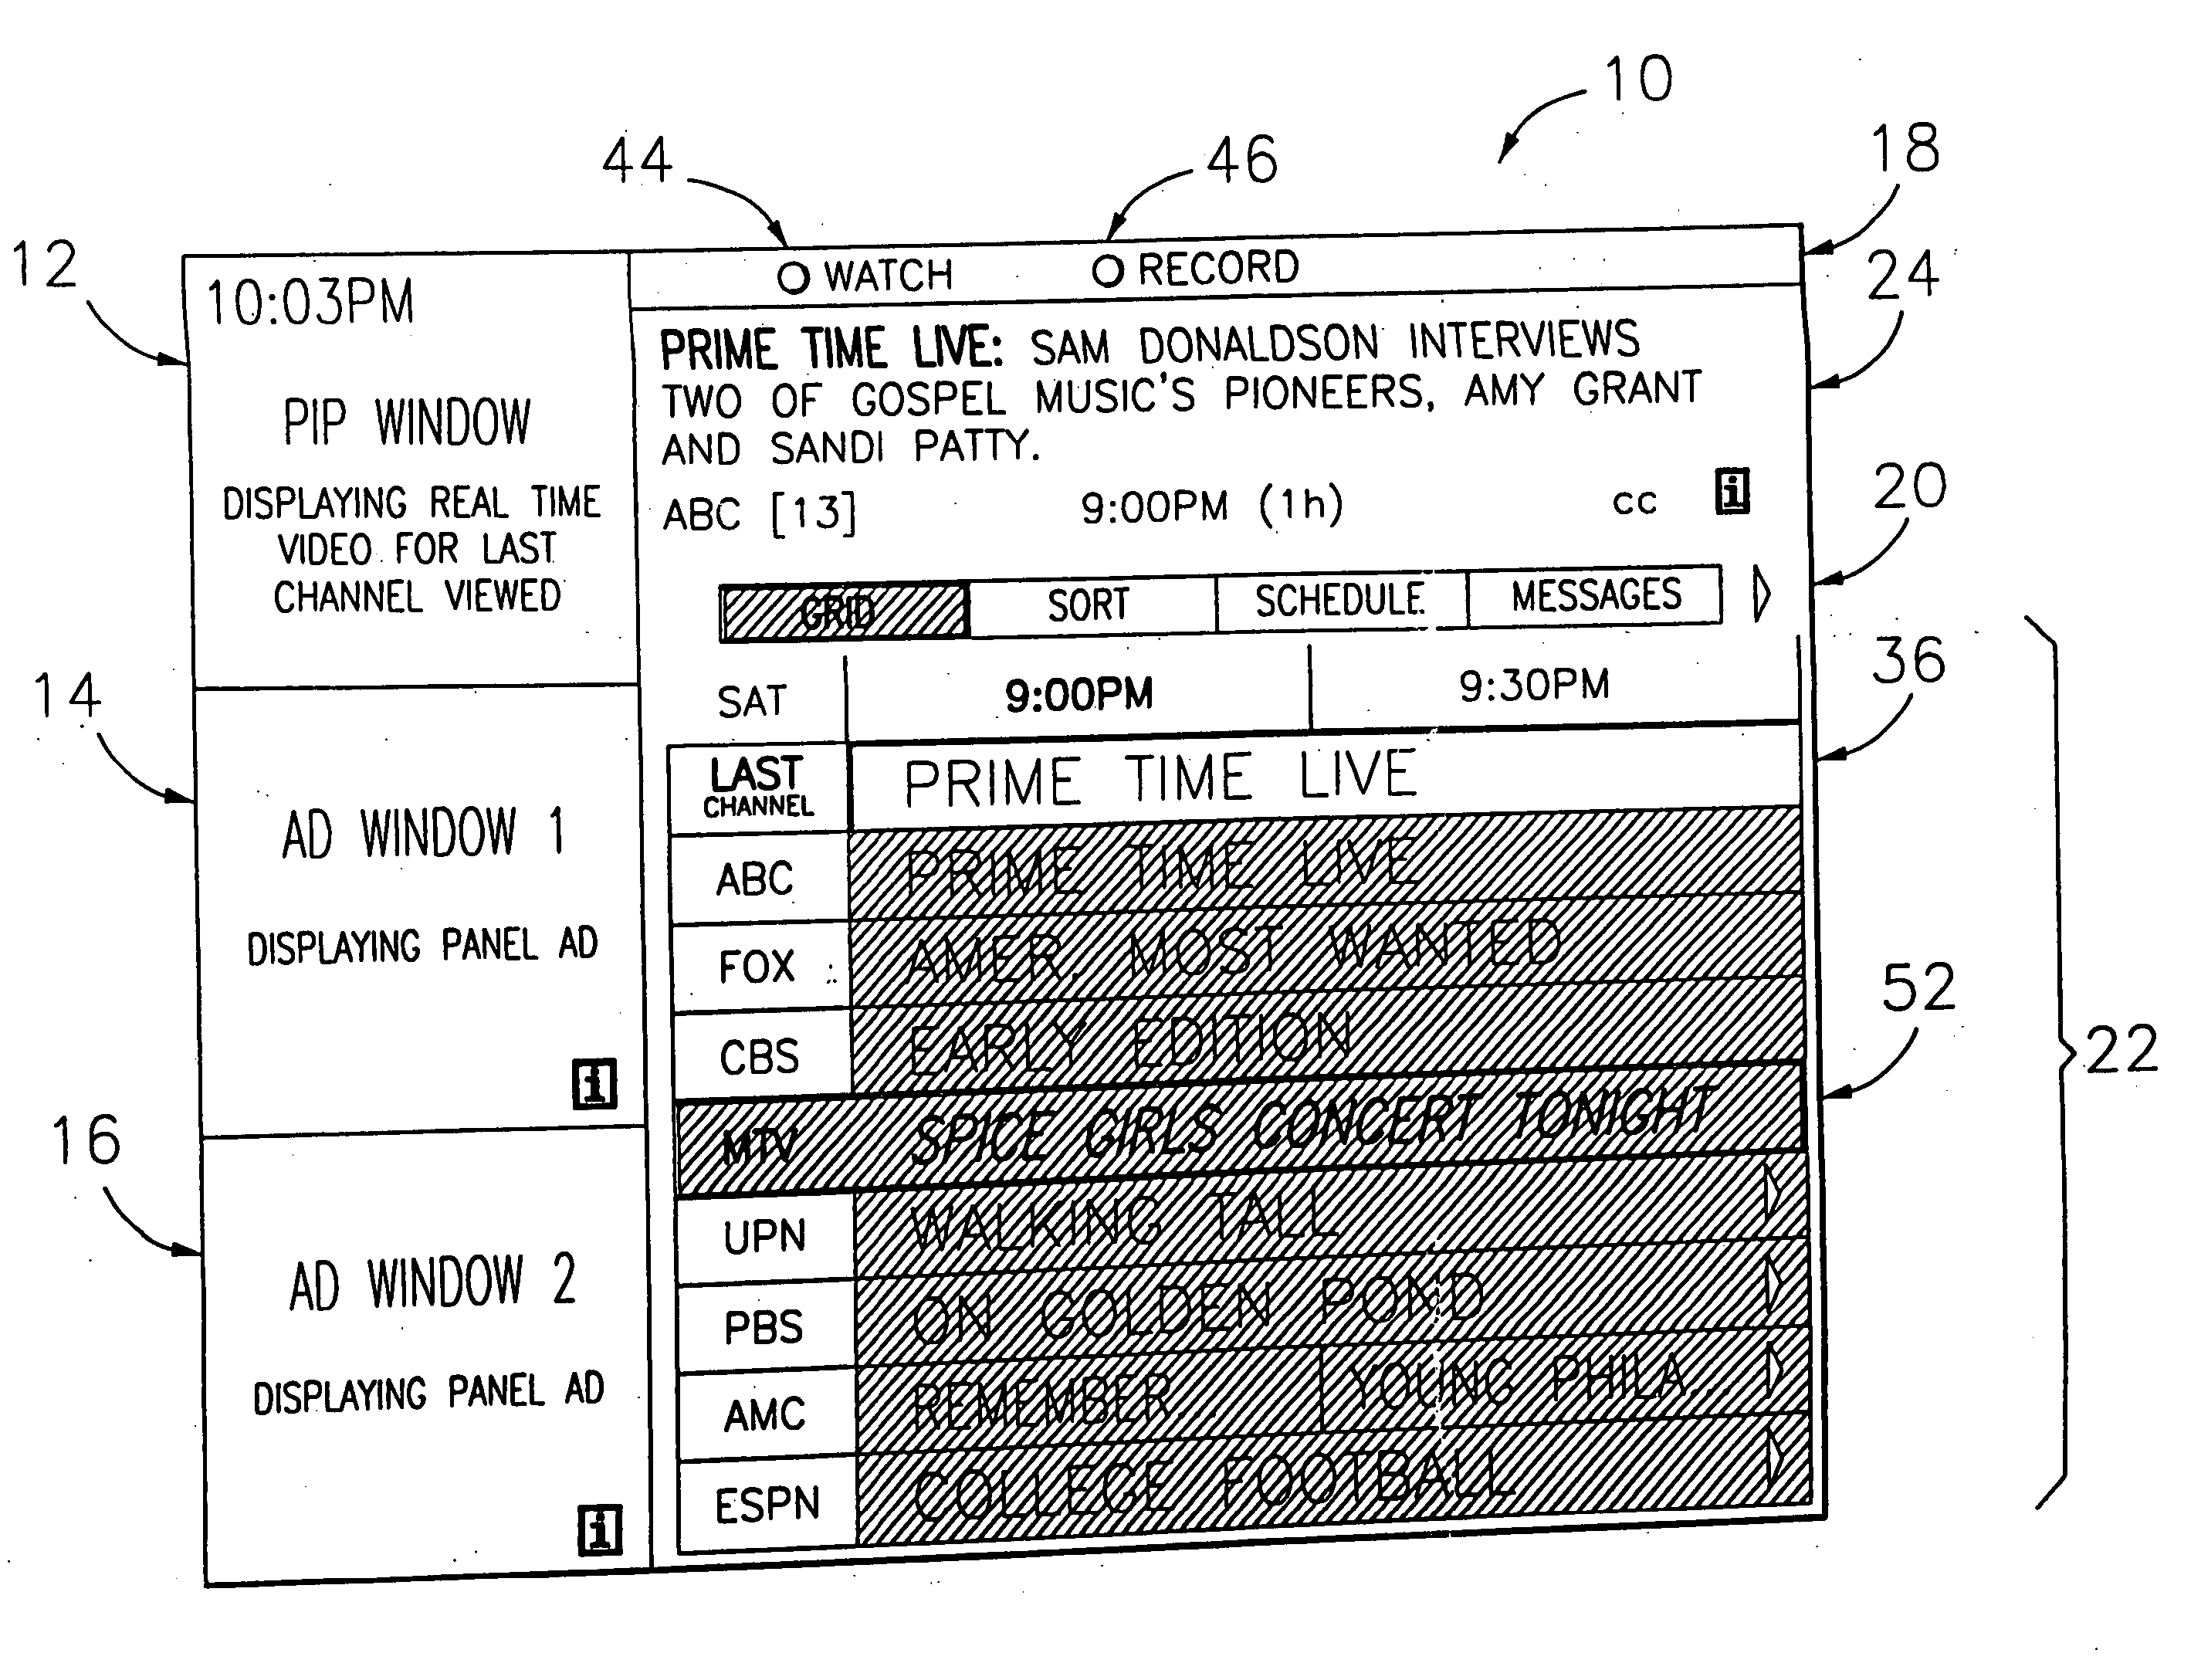 System and method for targeted advertisement display responsive to user characteristics